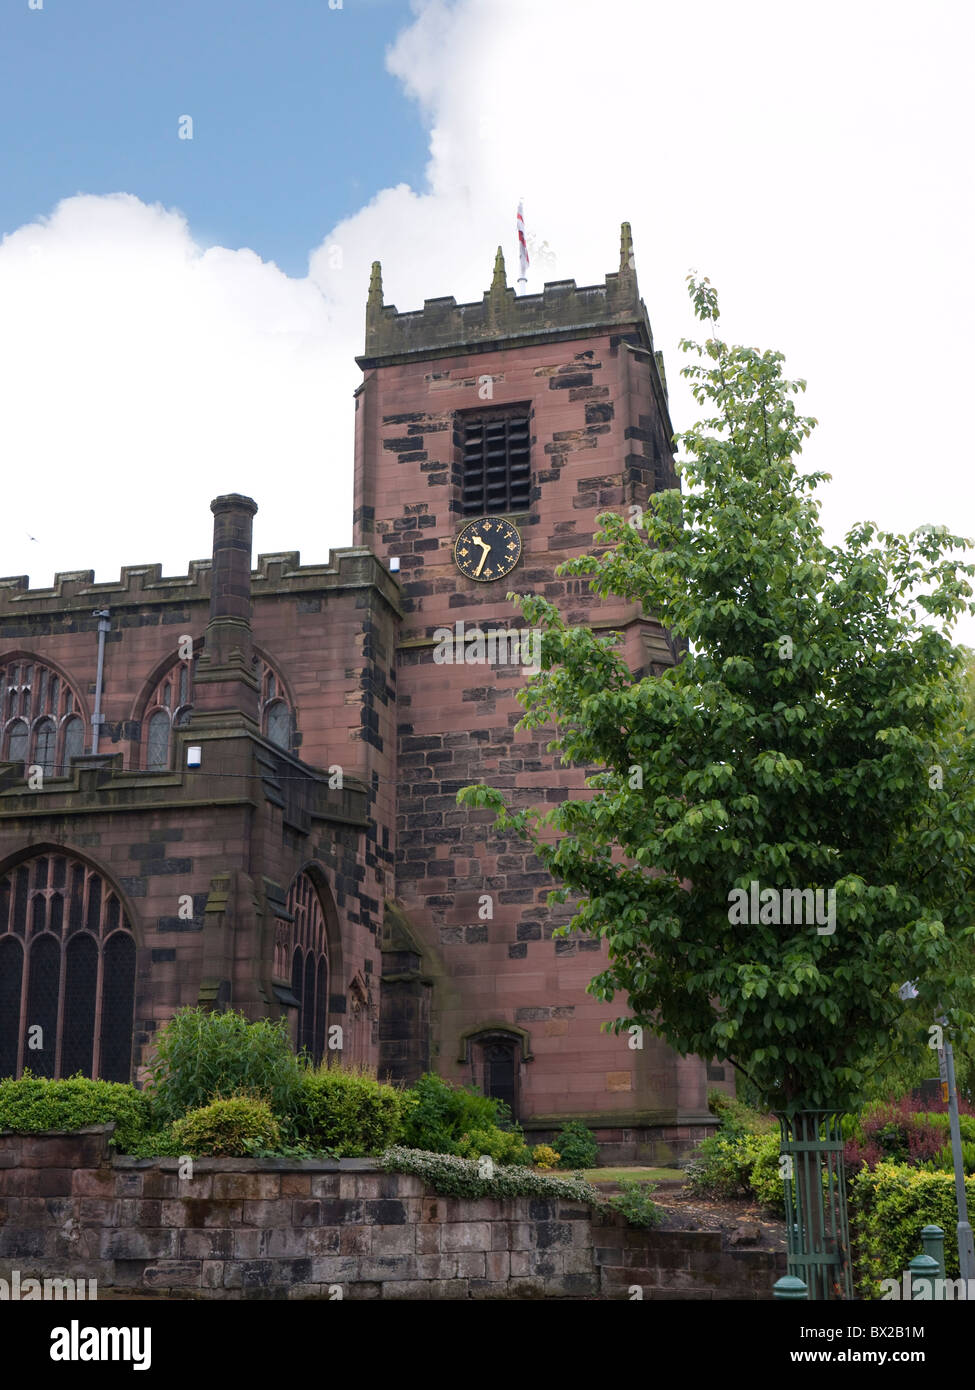 The Parish Church of Mary the Virgin in the Town of Eccles in Salford in the Greater Manchester Area Stock Photo